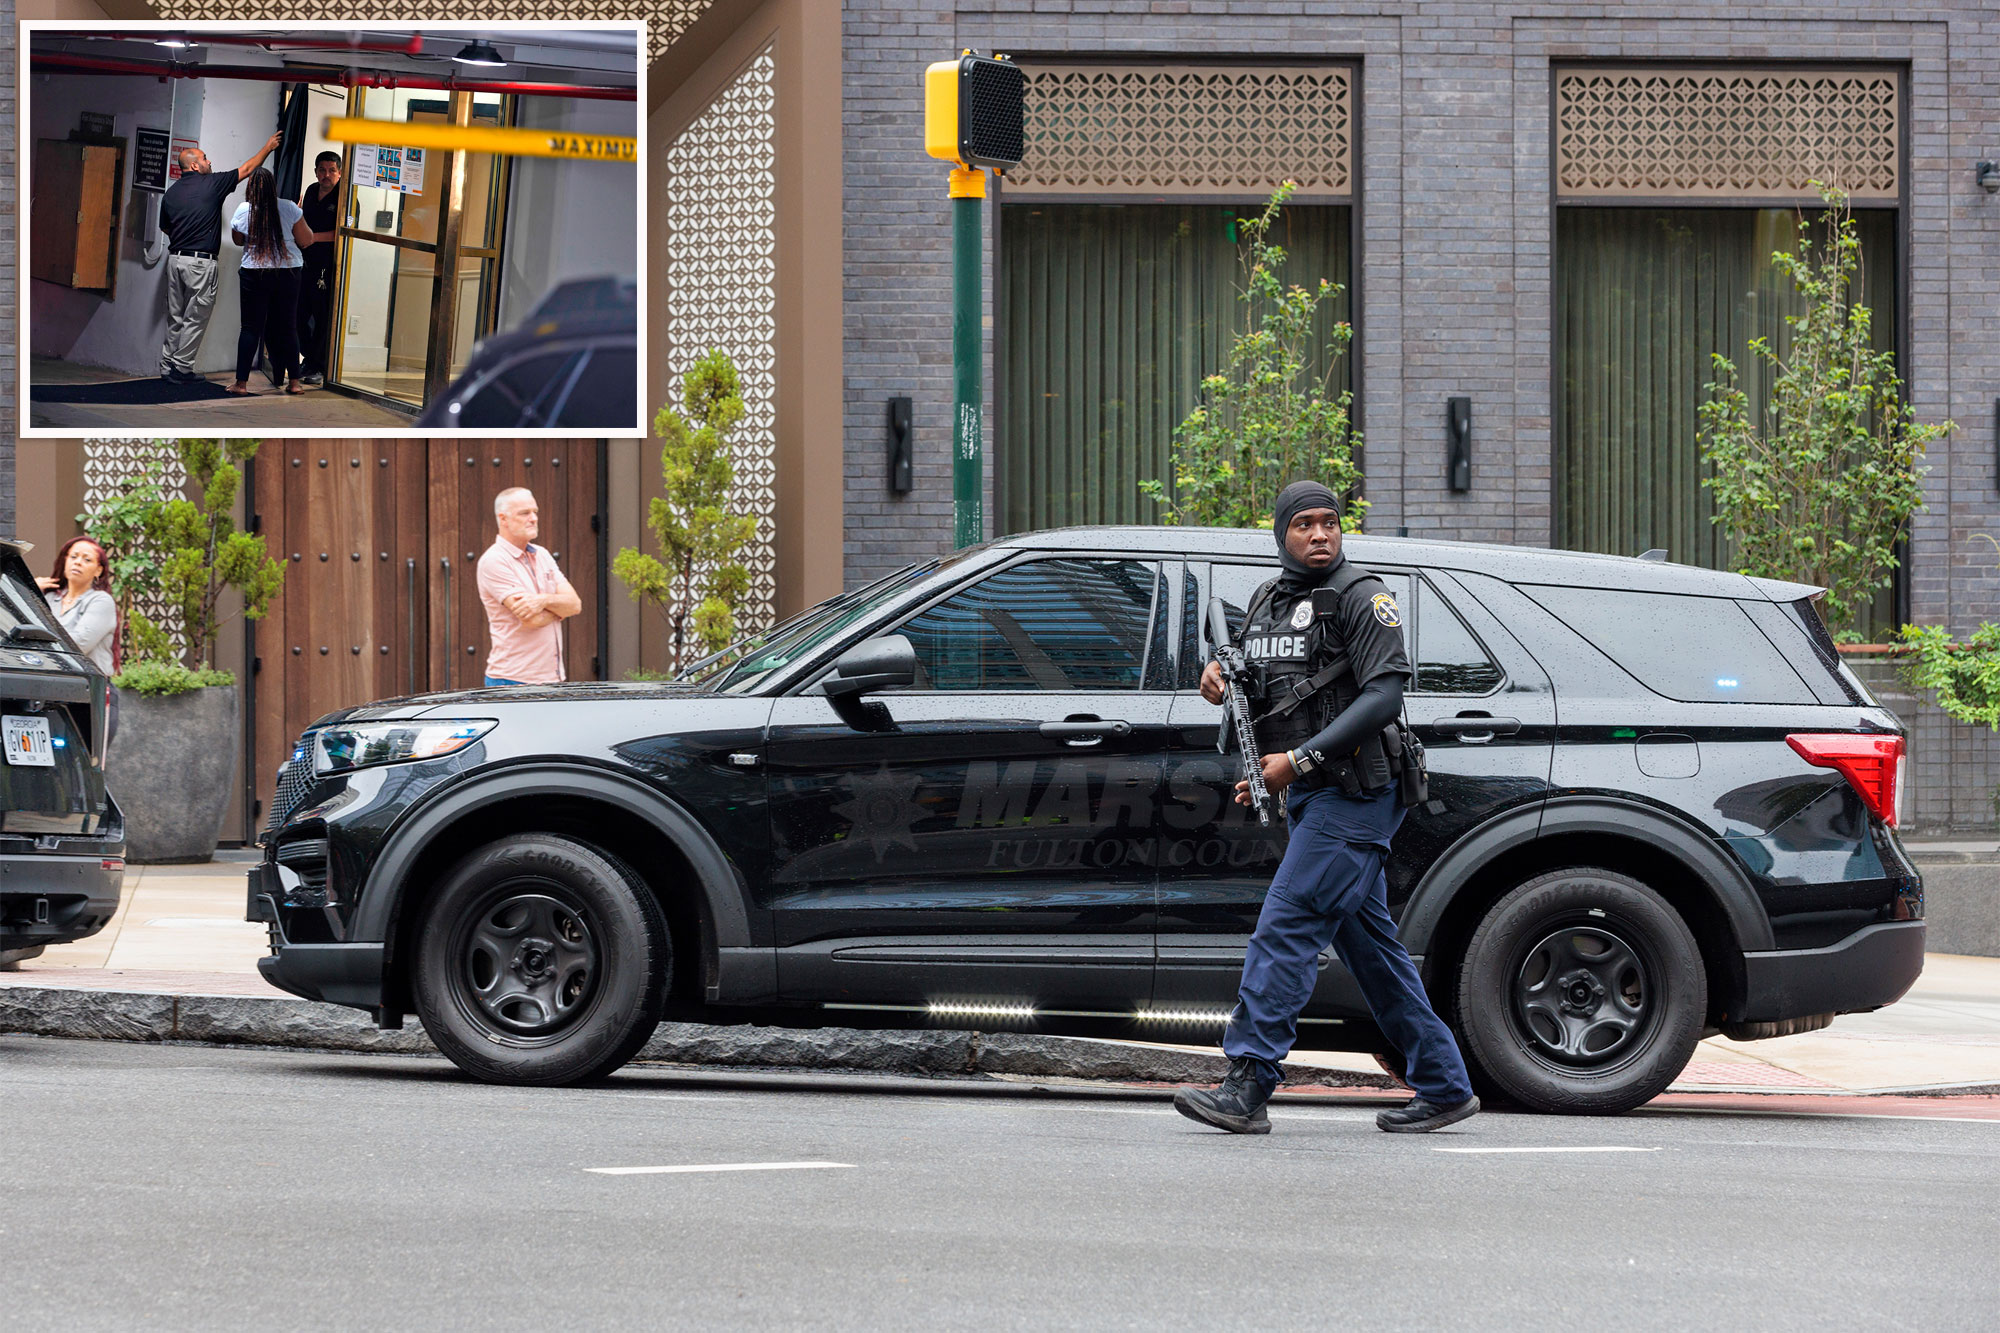 A police officer walks in the street carrying a large gun.